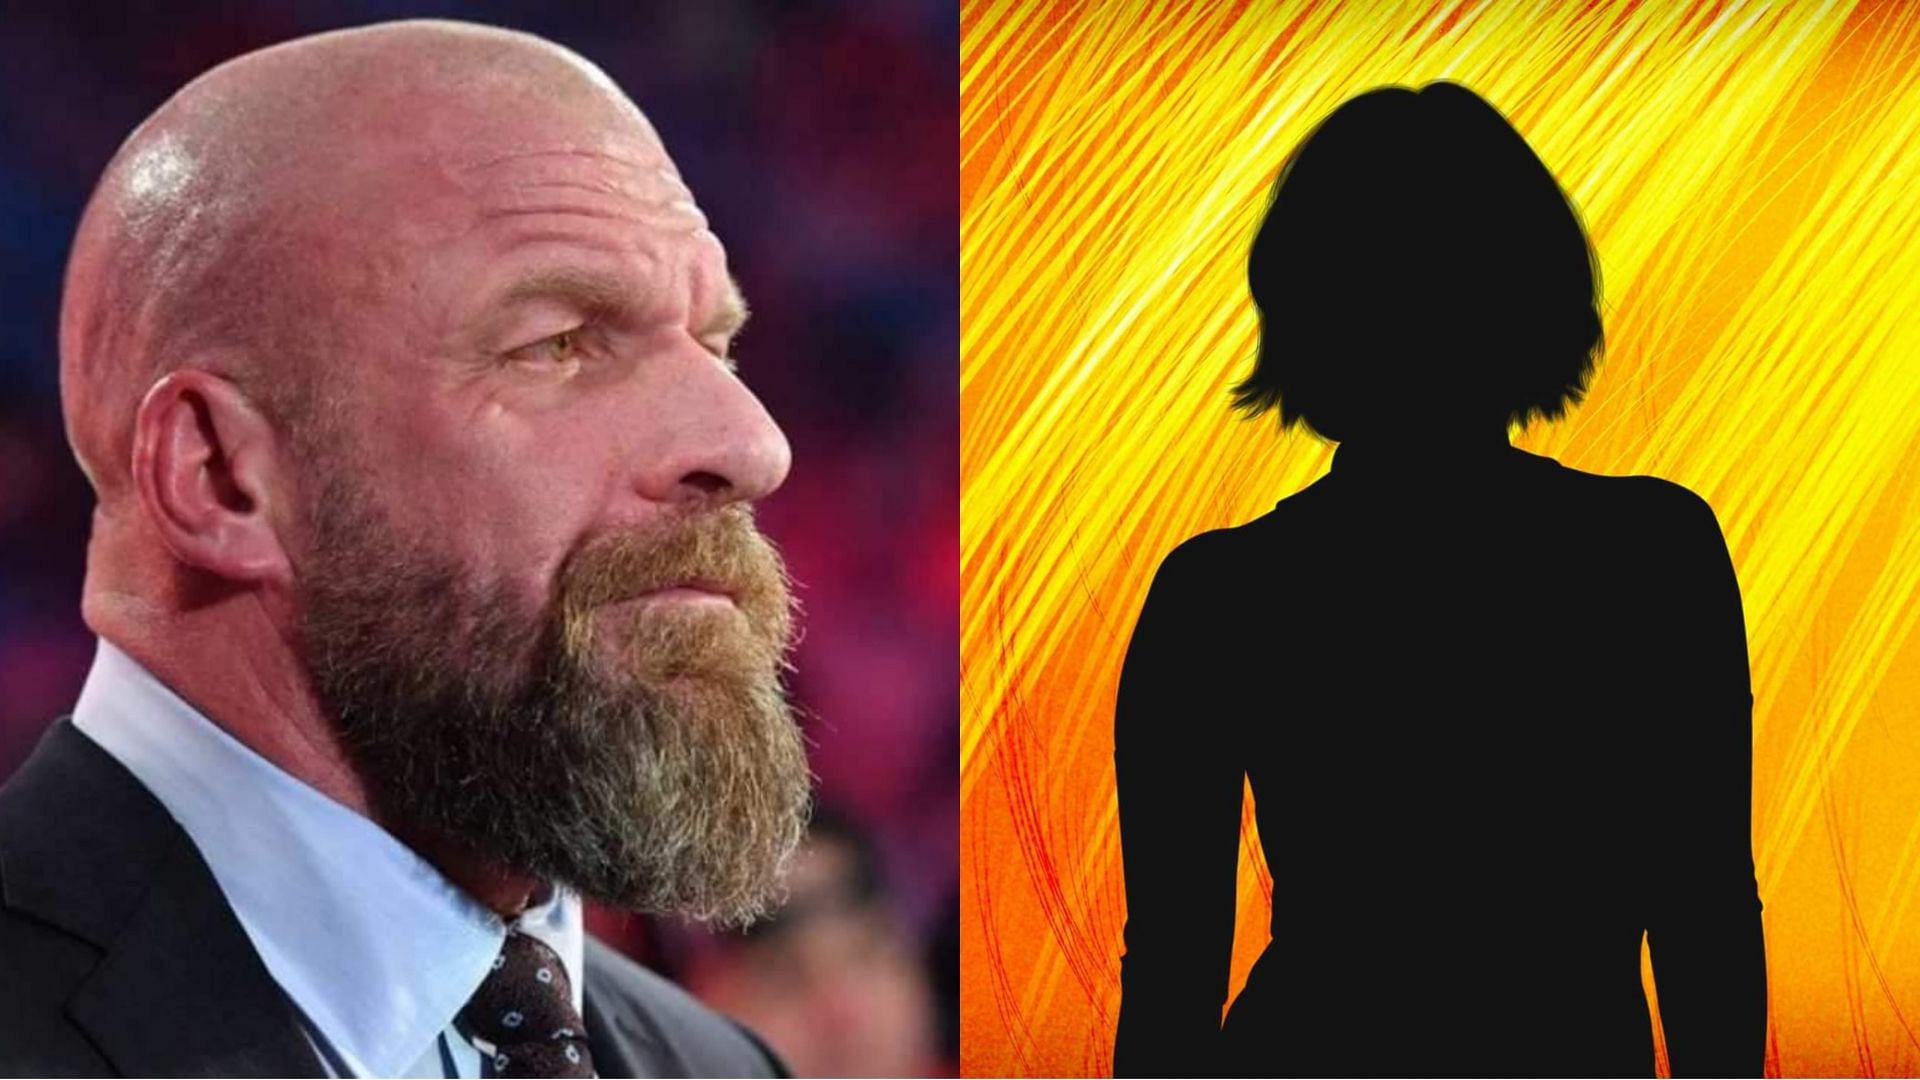 Triple H has made many creative changes to WWE.